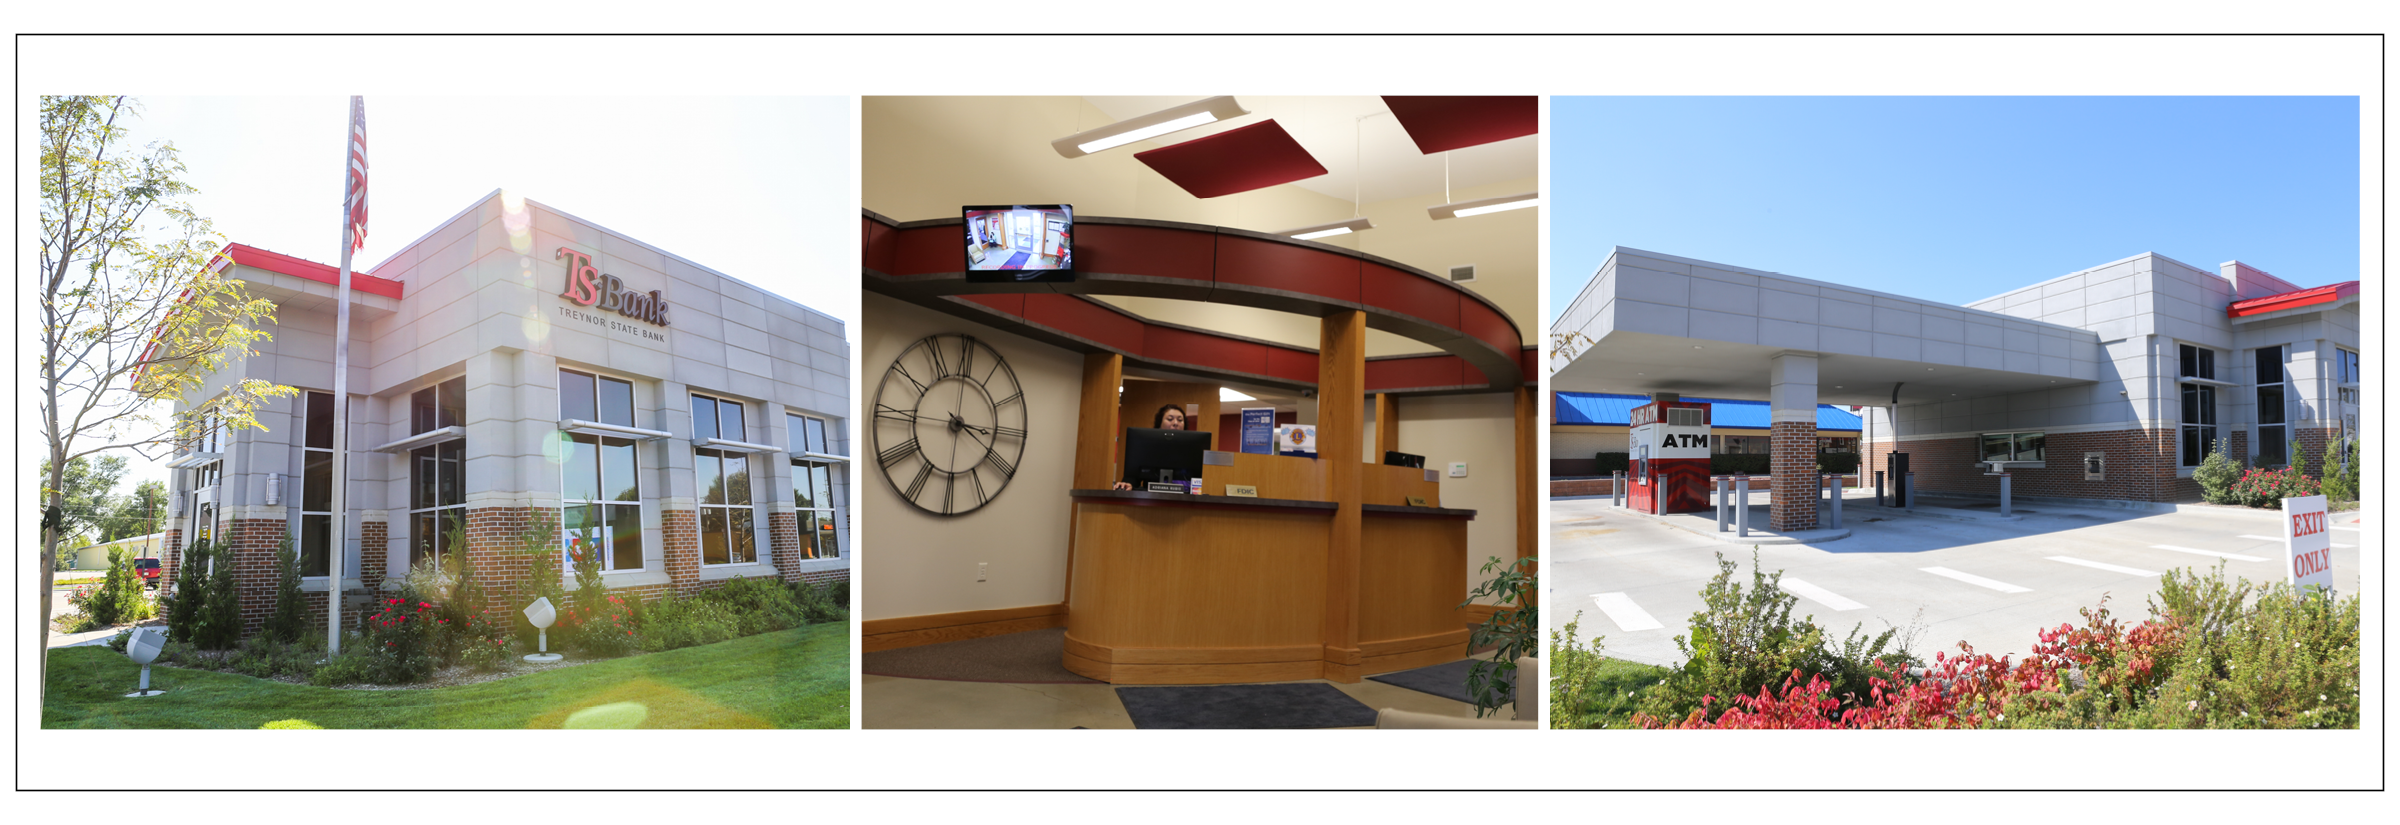 exterior and interior images of ts bank council bluffs west broadway location